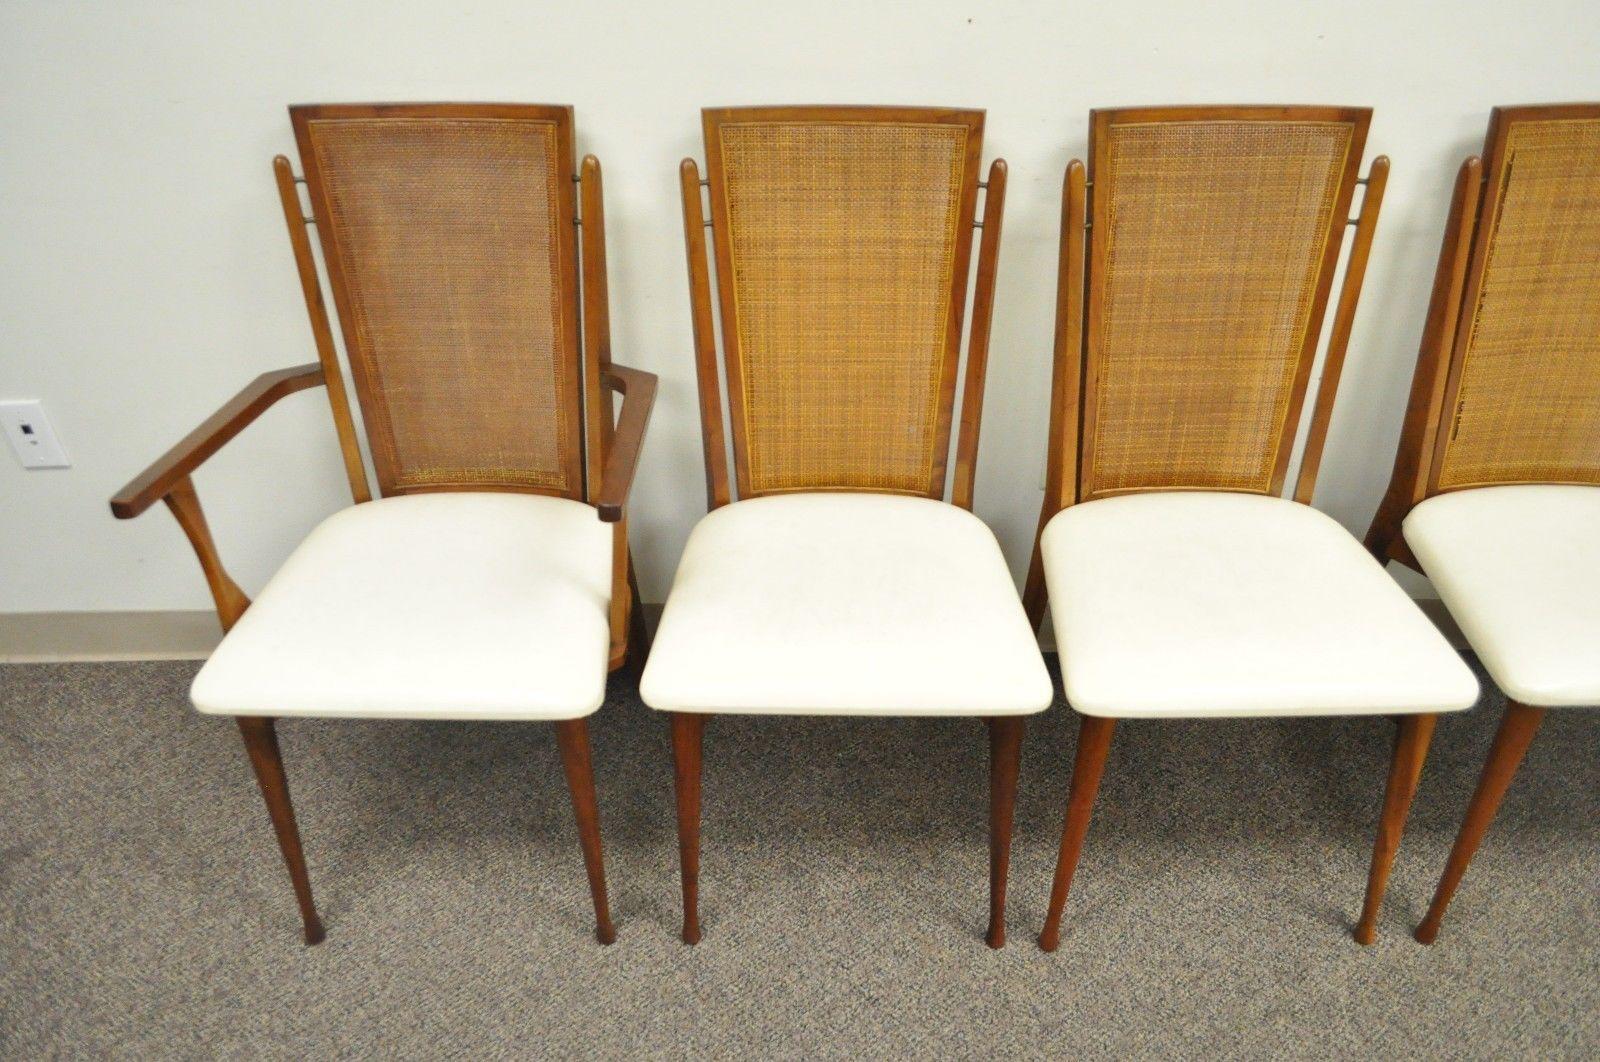 Set of Six Specialty Woodcraft Midcentury Danish Modern Cane Teak Dining Chairs In Good Condition For Sale In Philadelphia, PA